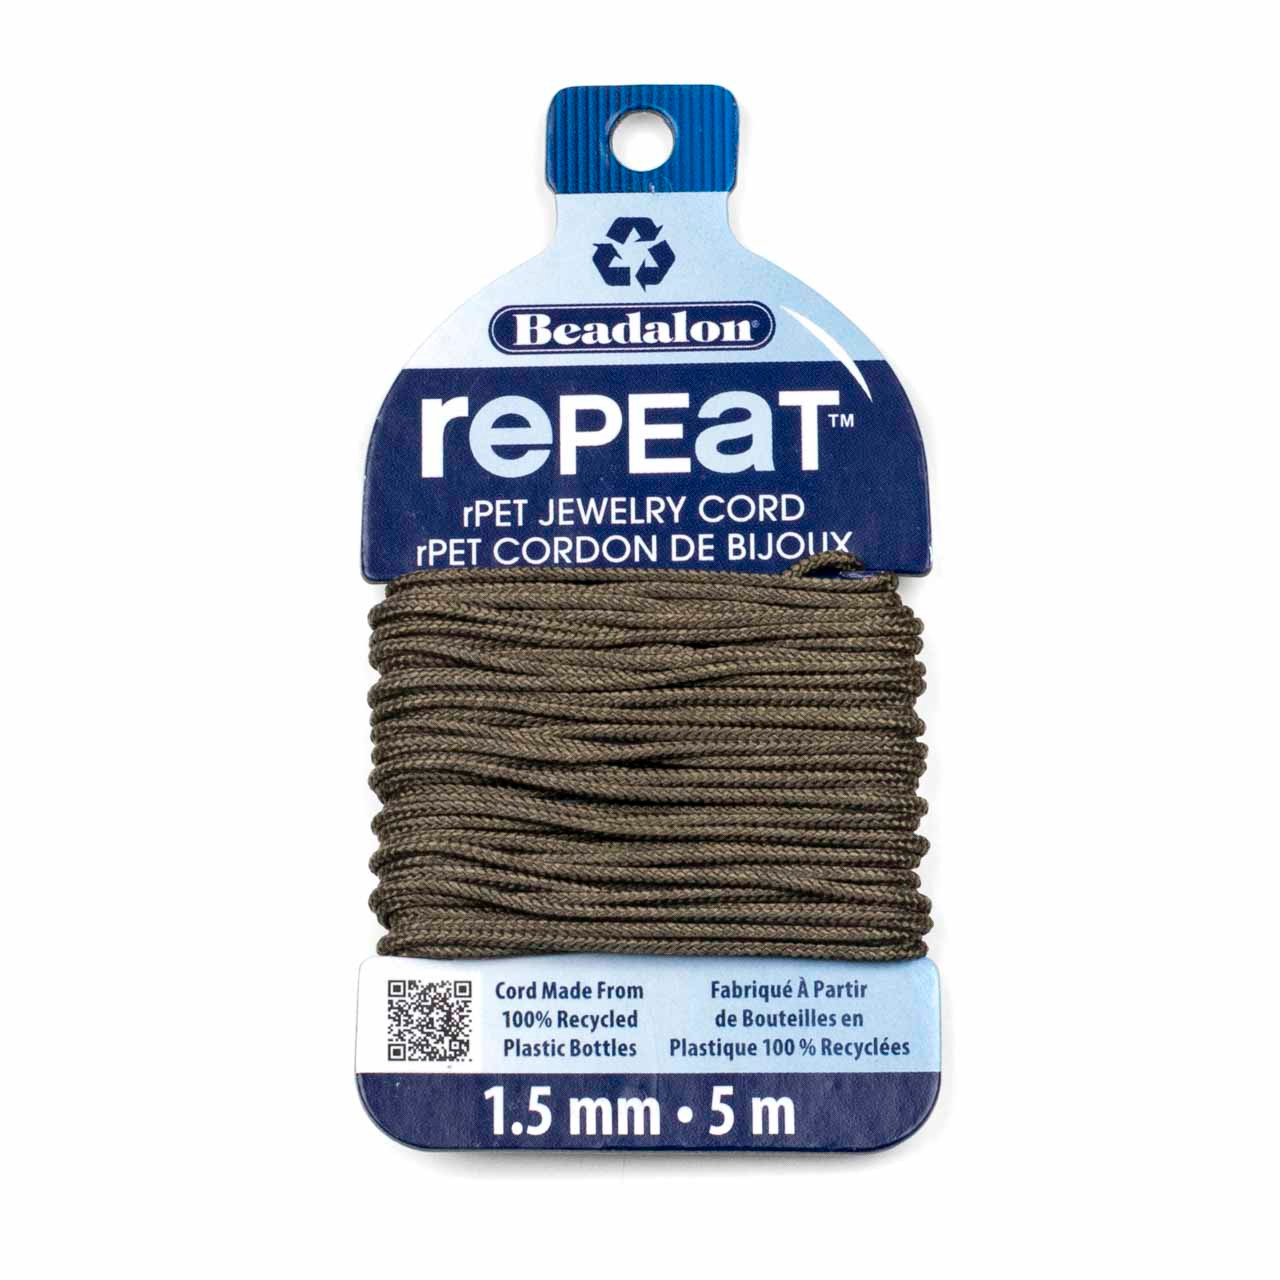 RePEaT 100% Recycled PET Braided Jewelry Cord - 1.5 mm, Earth, 16.4 ft/5 m